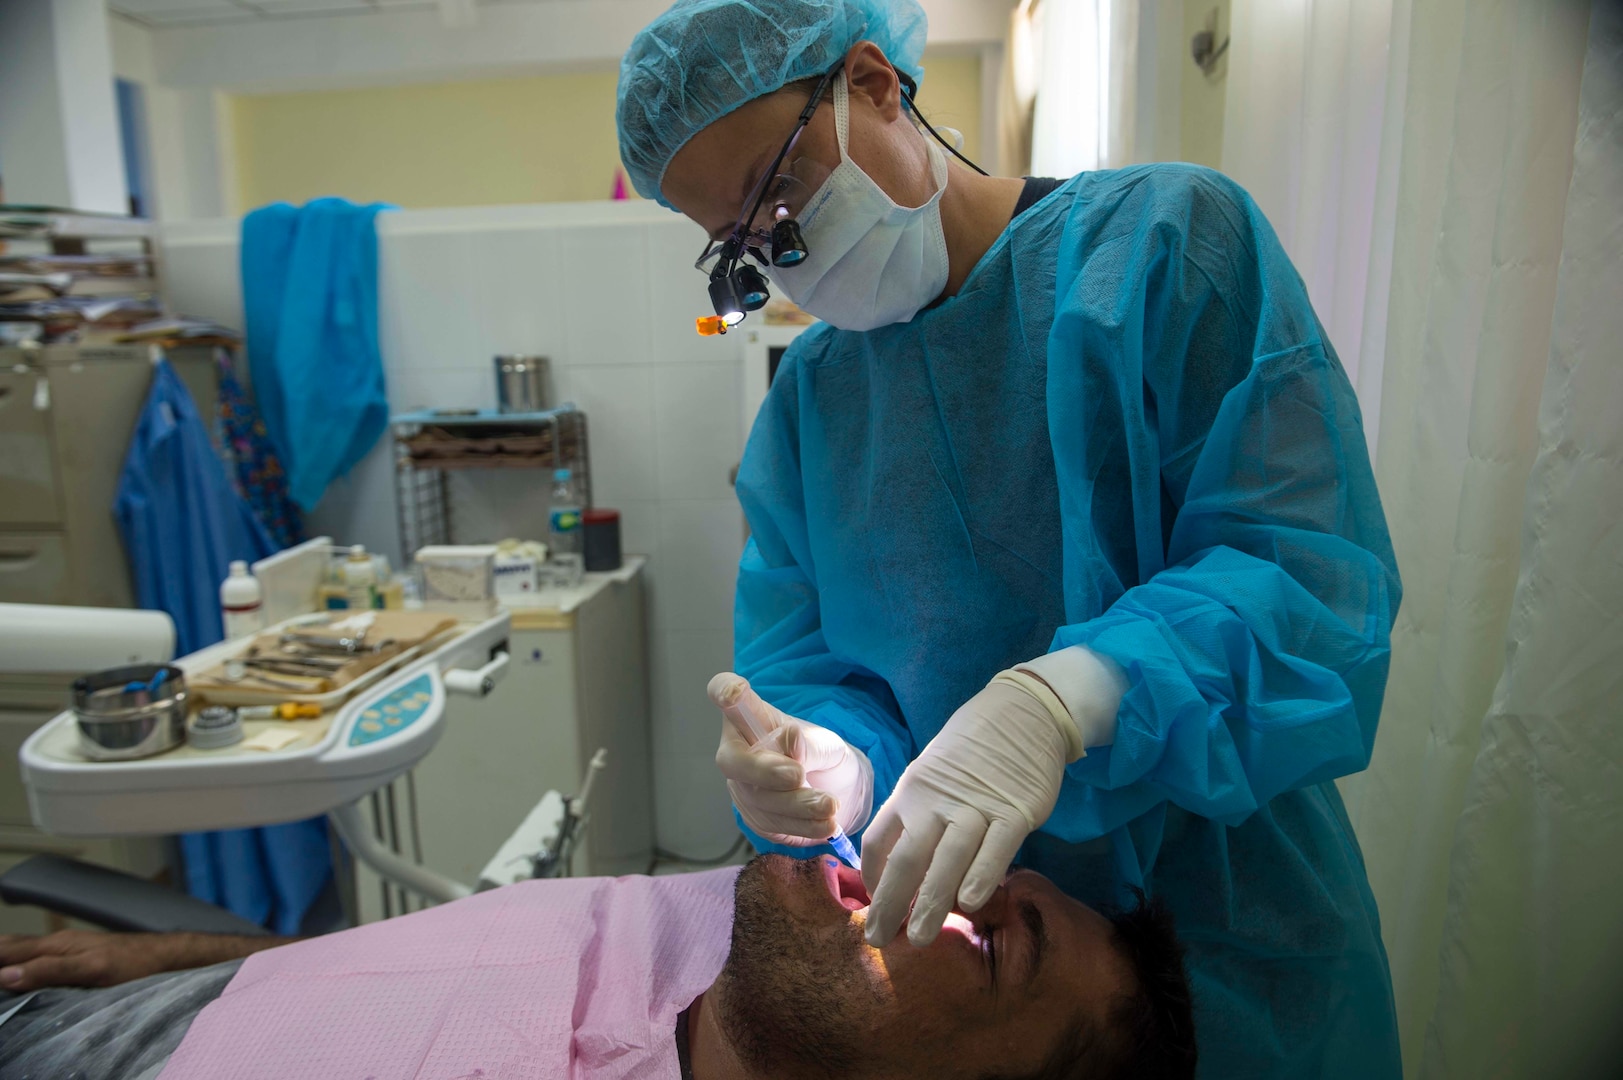 TRUJILLO, Honduras (Feb. 23, 2017) - Lt. Paula Davidson, a dentist and native of Casper, Wyo., assigned to Naval Health Branch Clinic Gulfport, Miss., performs a dental procedure at Hospital Salvador Paredes in support of Continuing Promise 2017’s (CP-17) visit to Trujillo, Honduras. CP-17 is a U.S. Southern Command-sponsored and U.S. Naval Forces Southern Command/U.S. 4th Fleet-conducted deployment to conduct civil-military operations including humanitarian assistance, training engagements, and medical, dental, and veterinary support in an effort to show U.S. support and commitment to Central and South America. (U.S. Navy Combat Camera photo by Mass Communication Specialist 2nd Class Brittney Cannady)